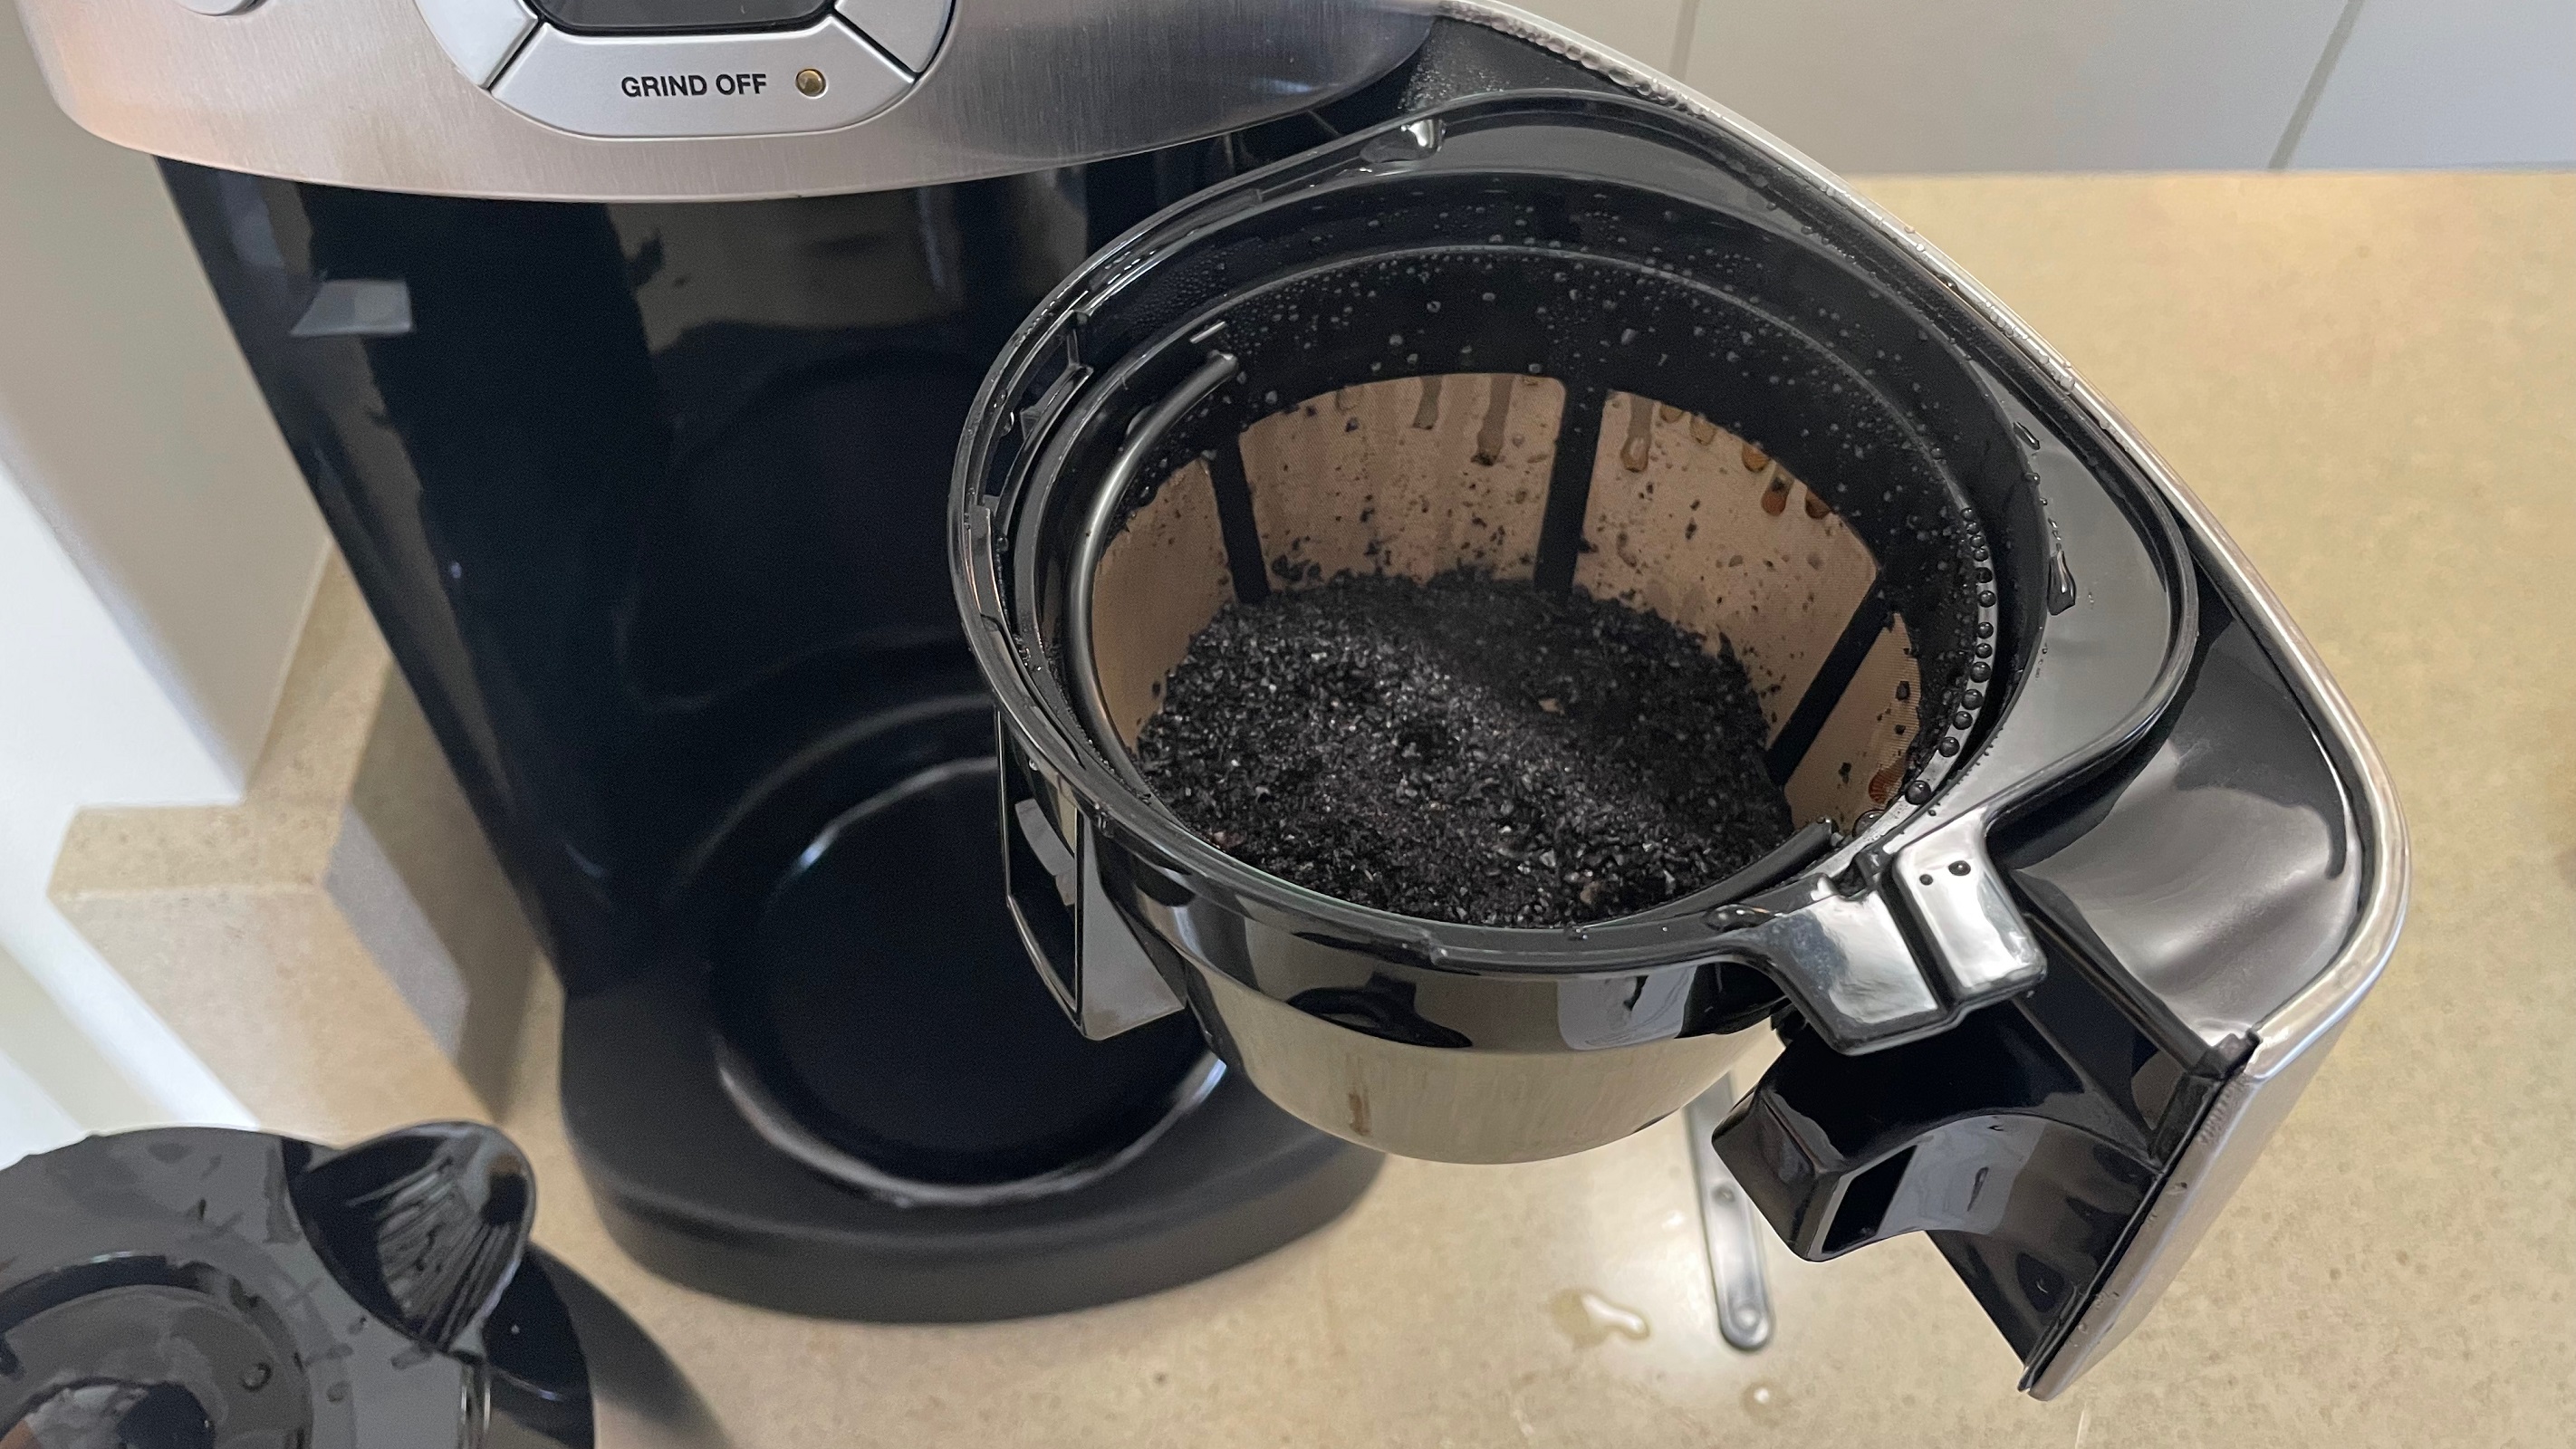 Emptying the grinds from the filter on the Cuisinart Grind & Brew